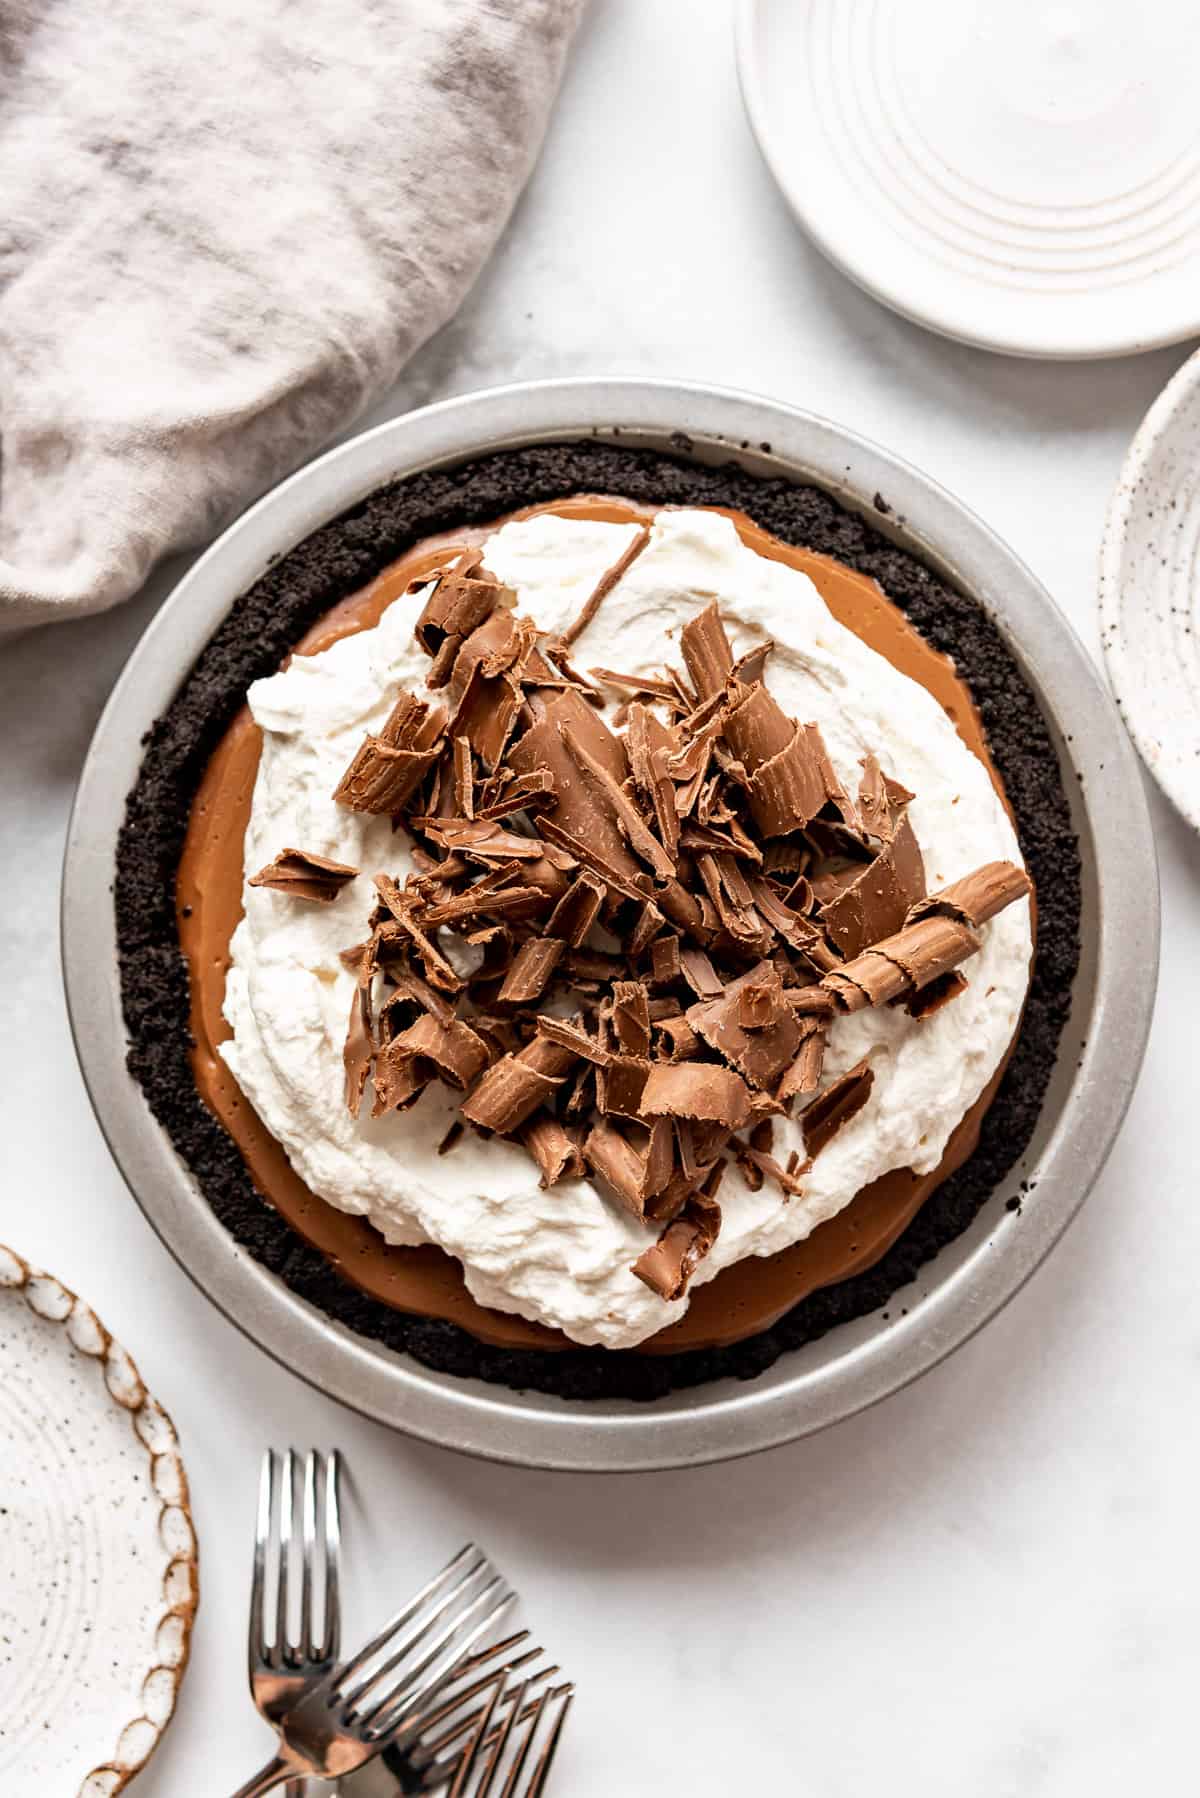 An image of an easy no-bake chocolate cream pie with an oreo pie crust, whipped cream, and chocolate shavings on top.